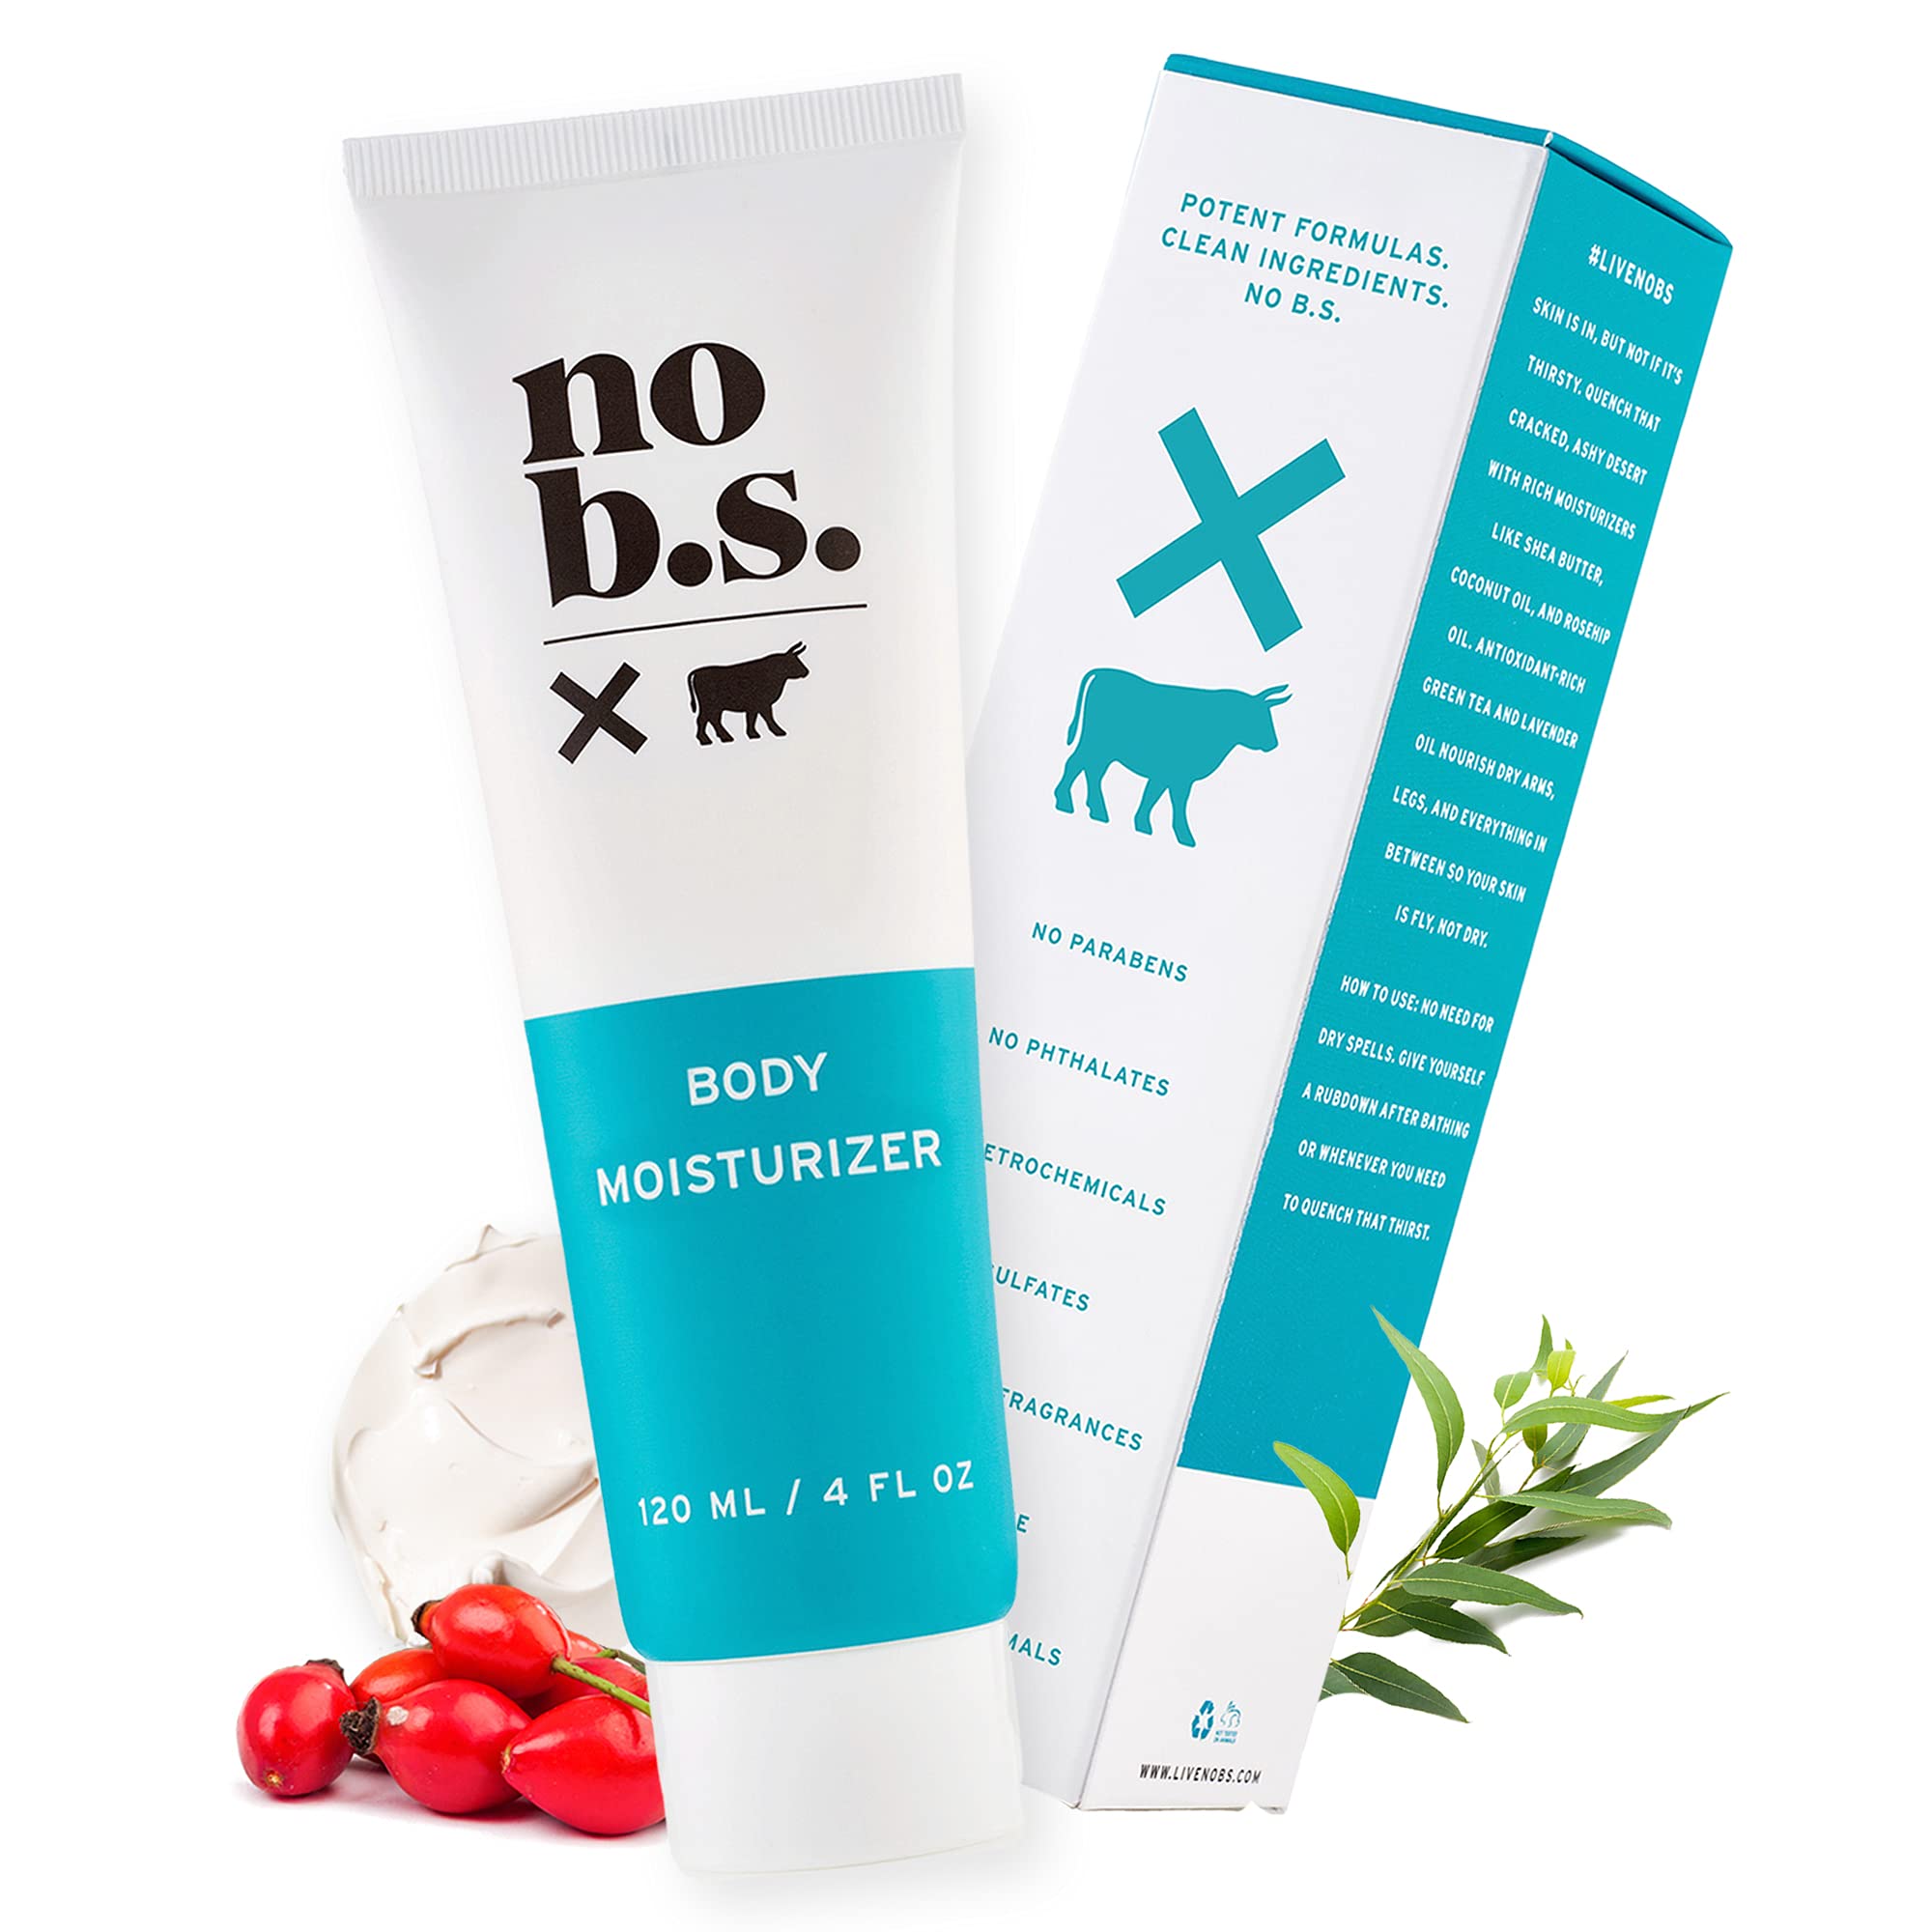 No BS Hand and Body Moisturizer l Ultra Hydrating Natural Body Lotion For Women and Men l Antioxidant-Rich Green Tea Protects Against Aging While Shea Butter and Lavender Oil Nourish Dry Skin